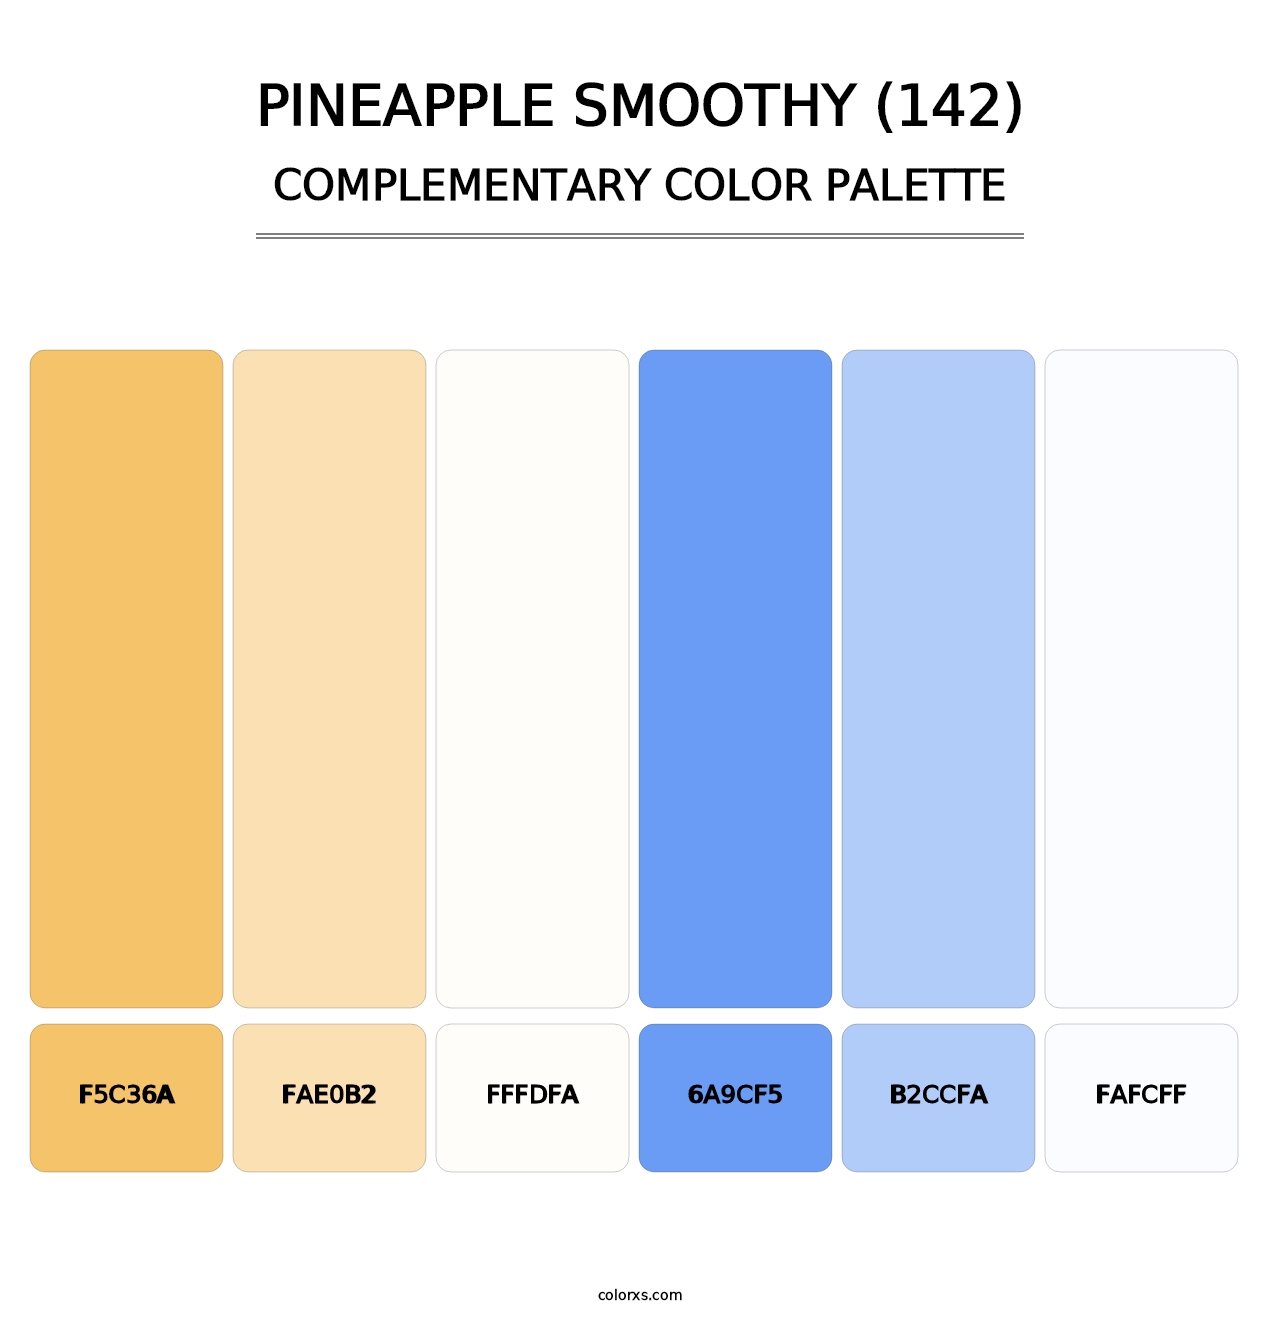 Pineapple Smoothy (142) - Complementary Color Palette